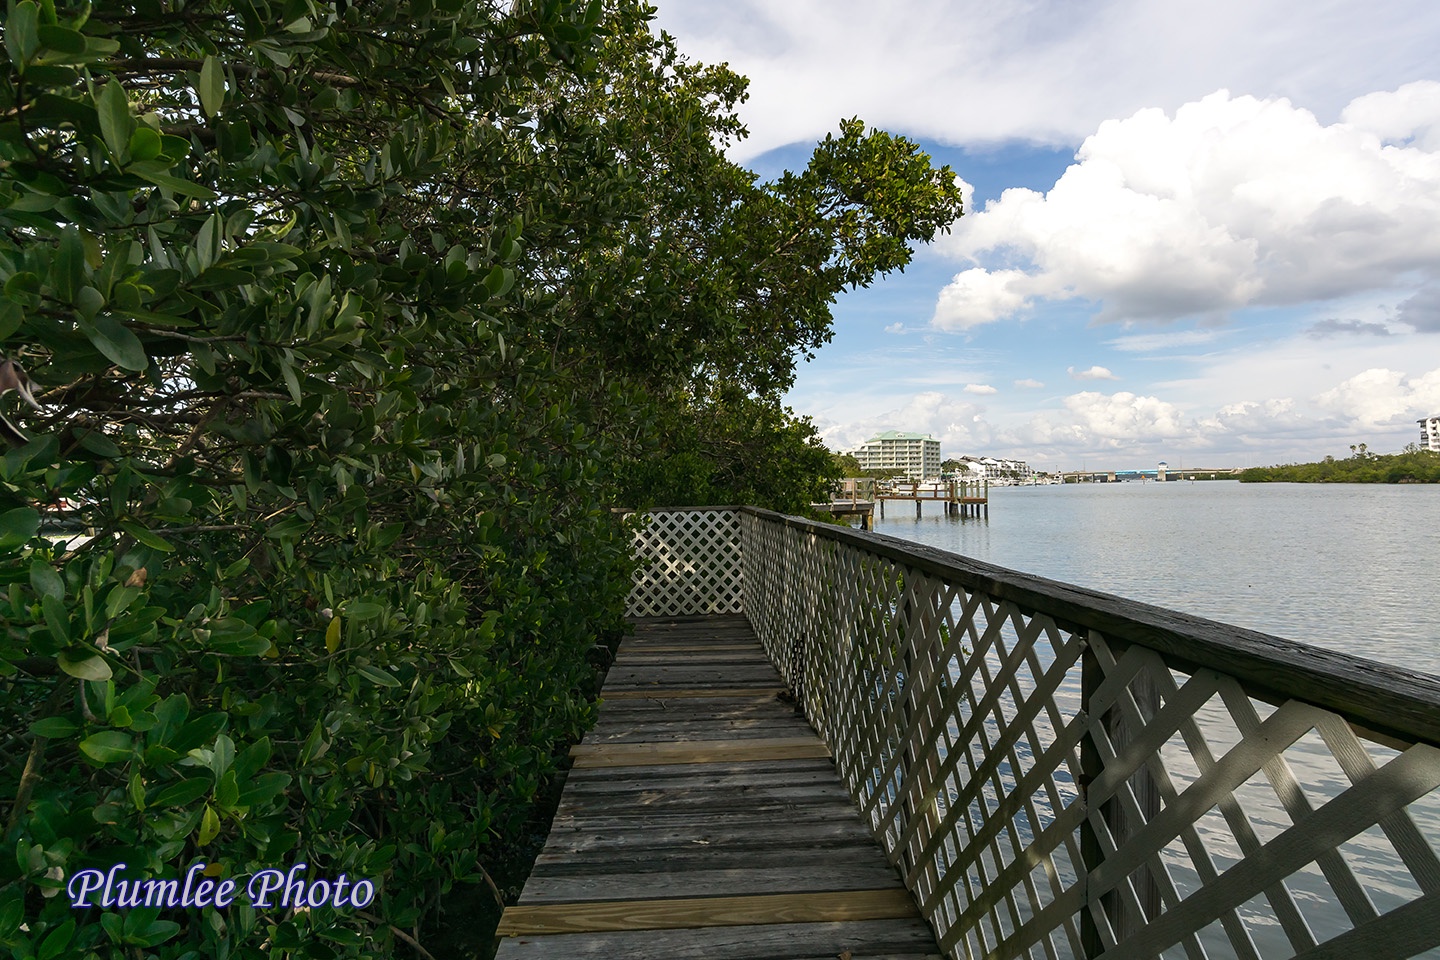 The Dock leads to a walkway to Downtown Indian Rocks Beach.